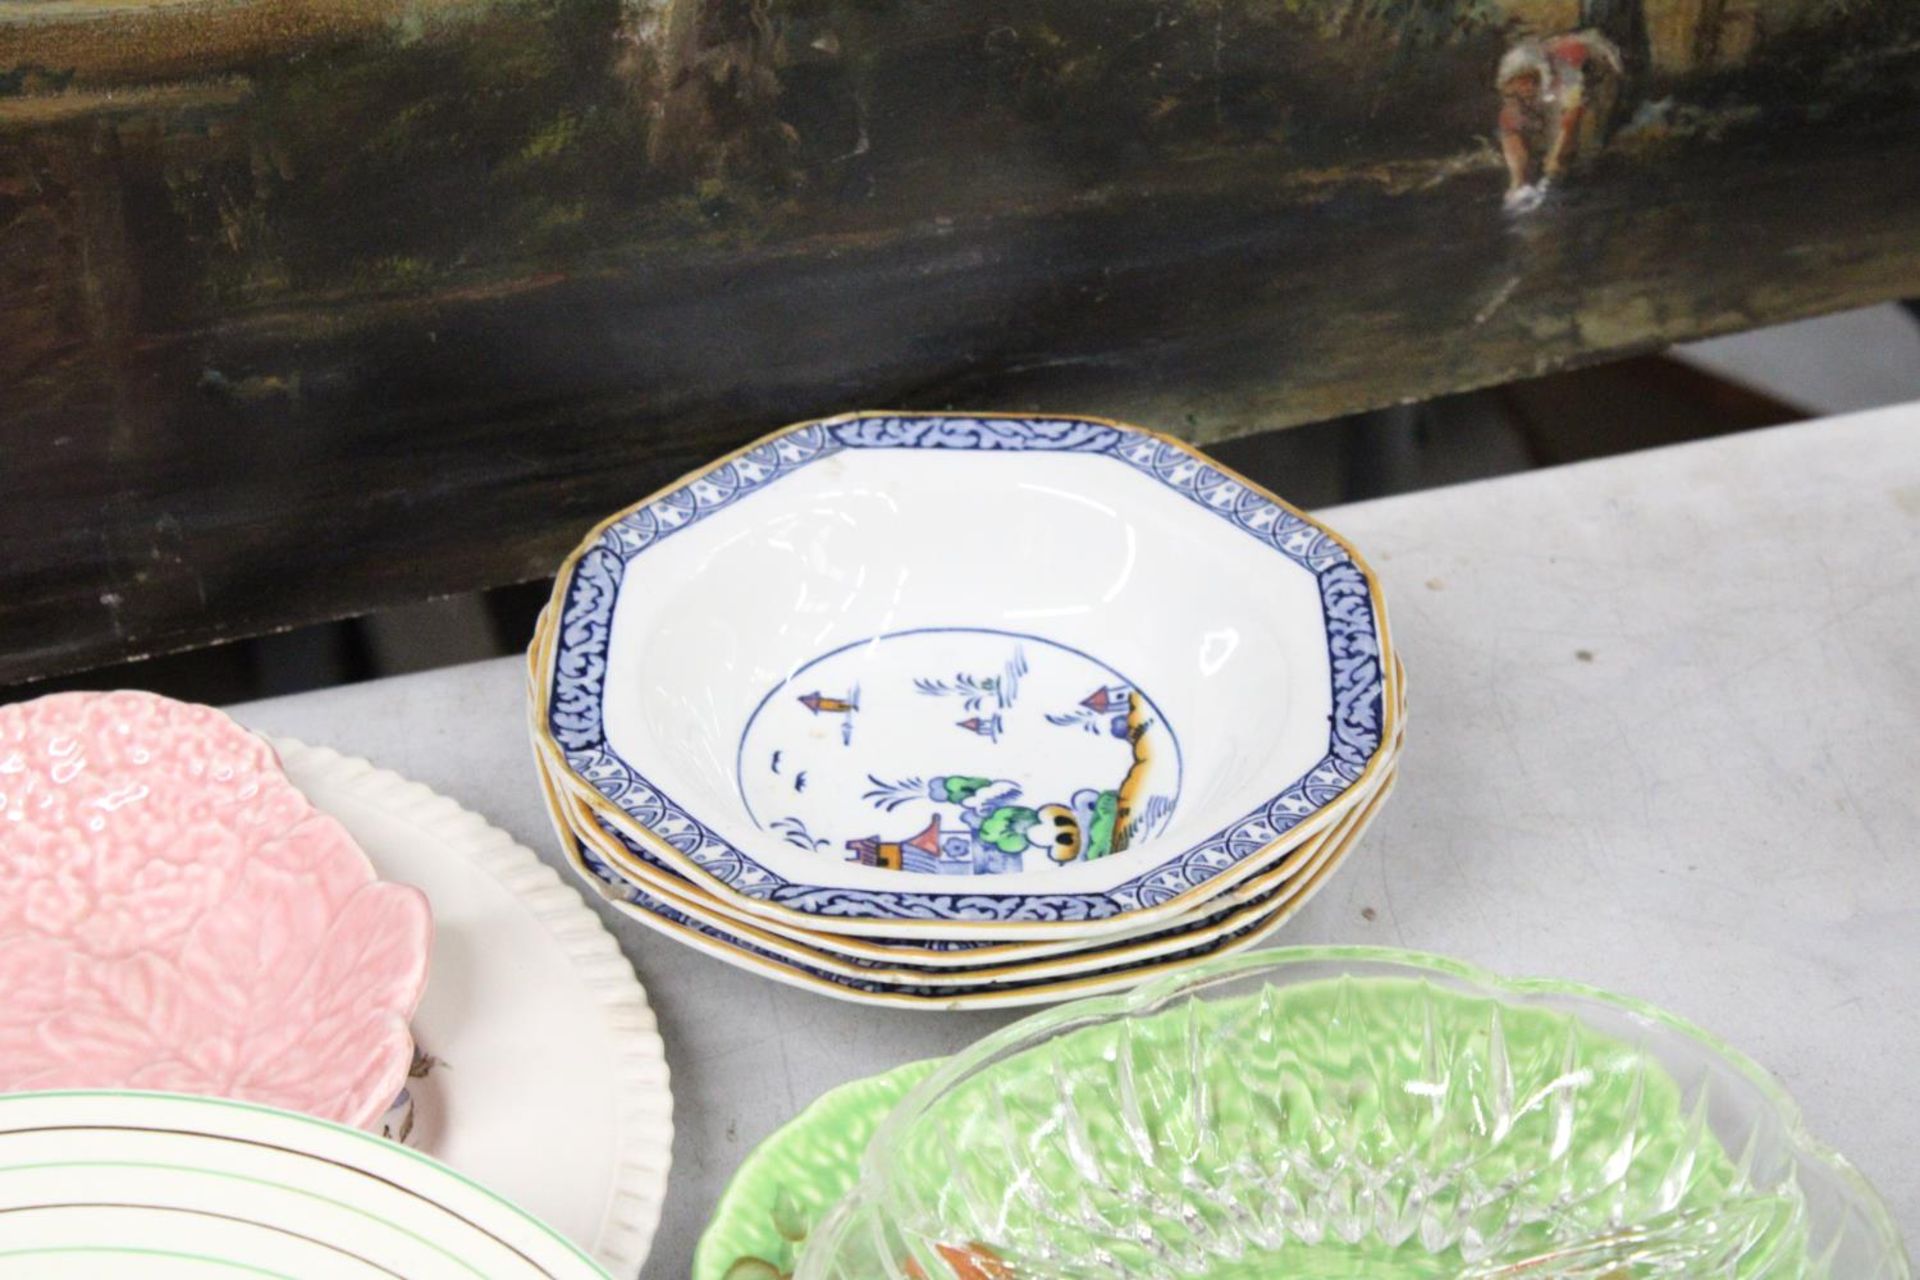 A QUANTITY OF ITEMS TO INCLUDE LEAF PLATES, WOODS WARE ORIENTAL STYLE BOWLS, GLASSES, ETC - Image 4 of 7